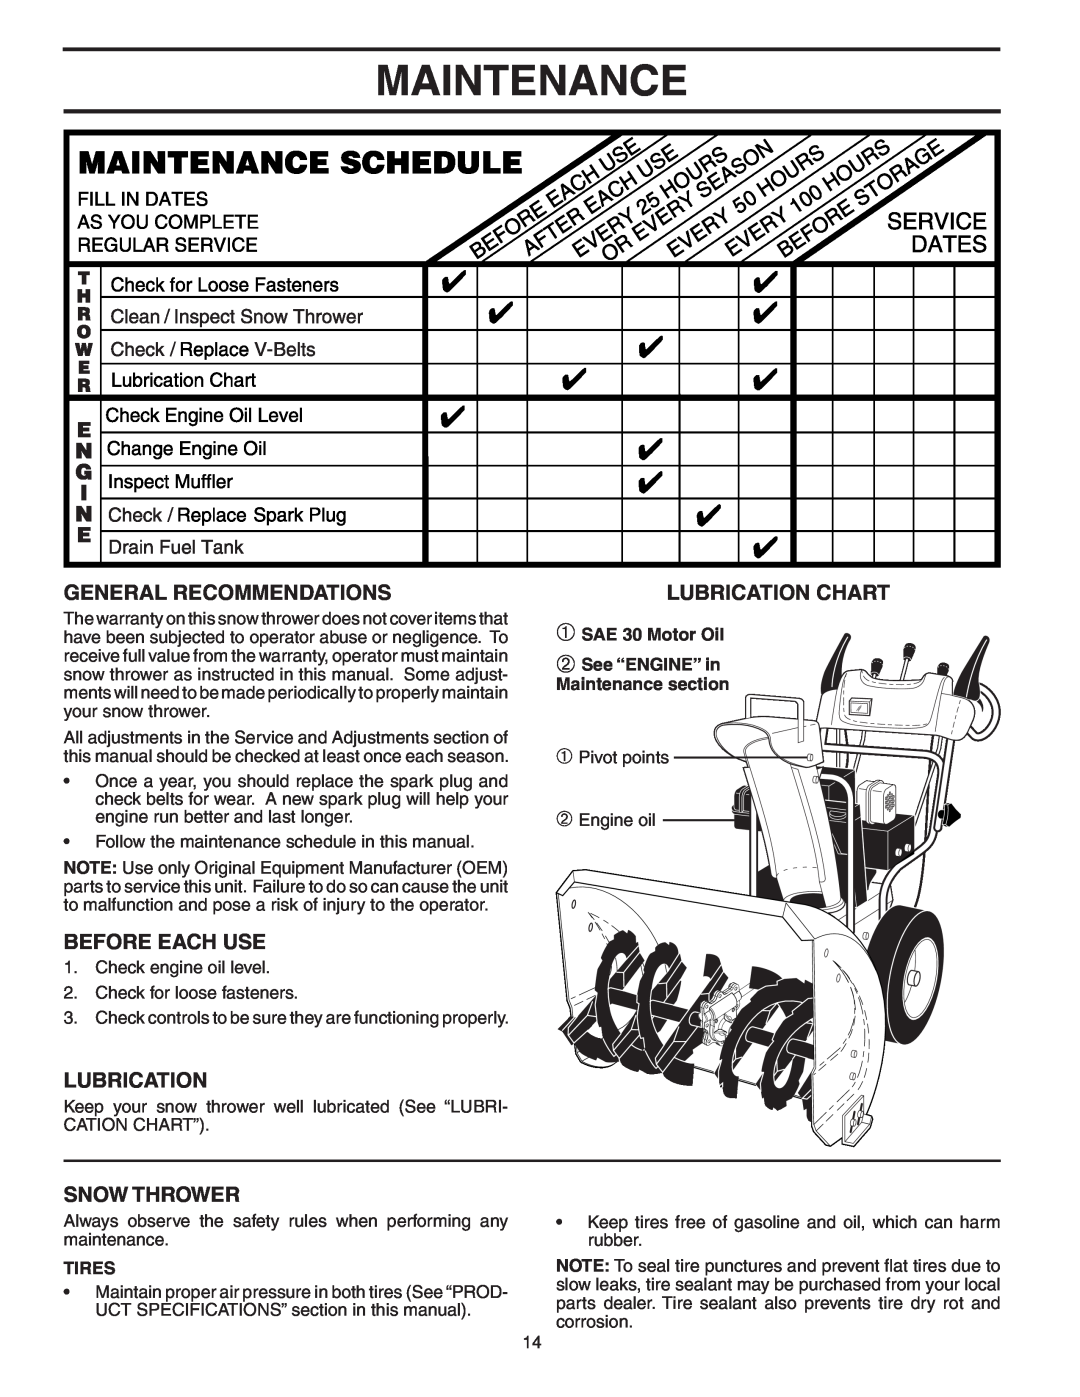 Poulan PP1130ESA Maintenance, General Recommendations, Before Each Use, Snow Thrower, Lubrication Chart, Tires 